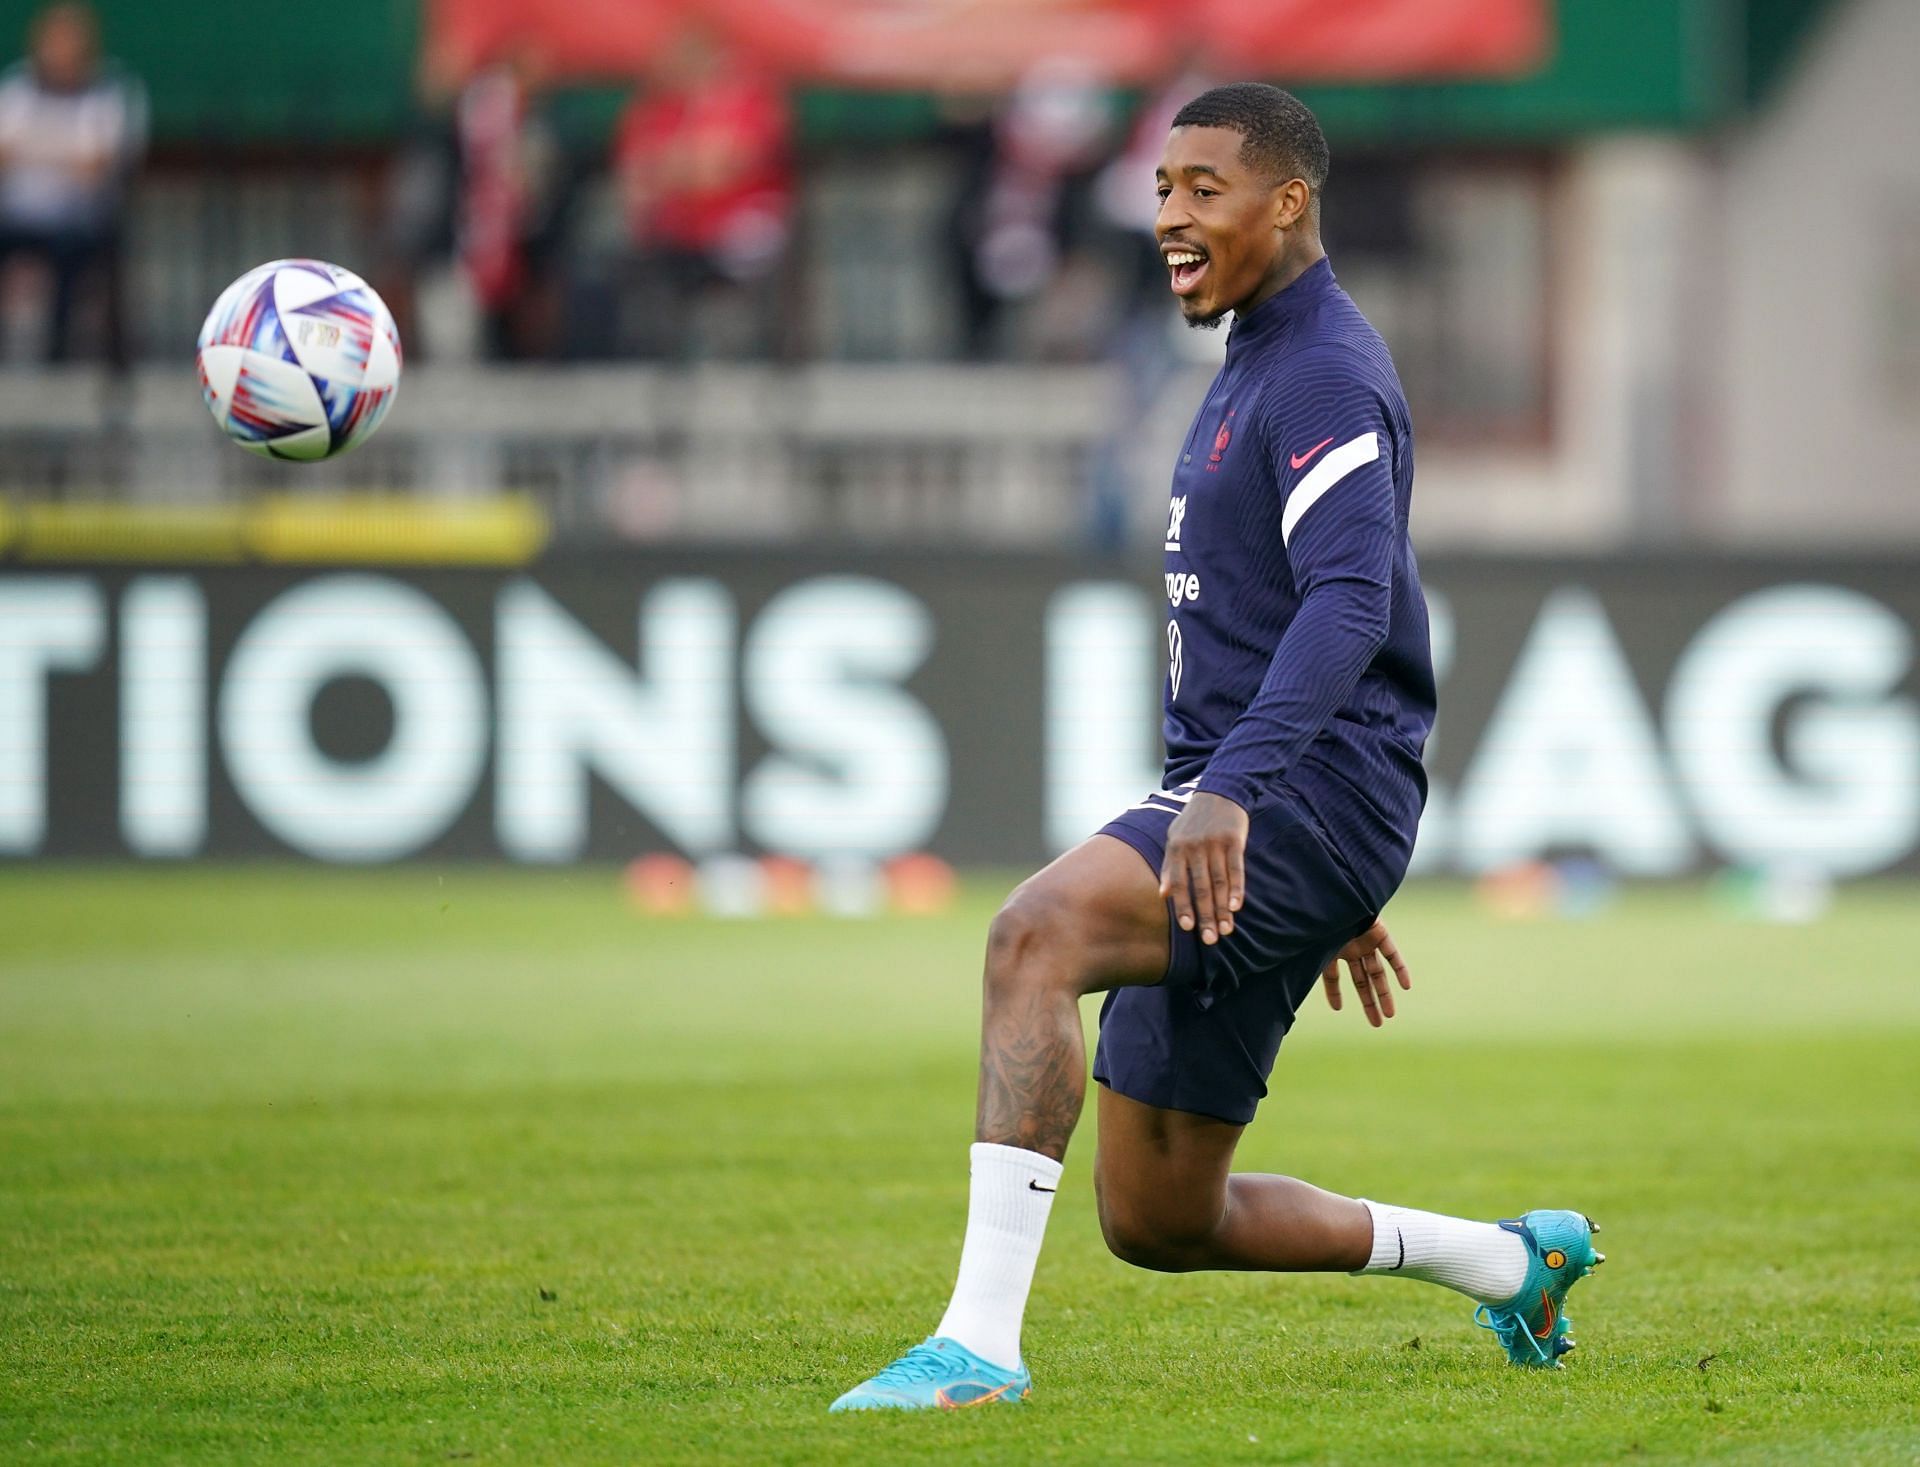 The France international could be an excellent Jules Kounde alternative.